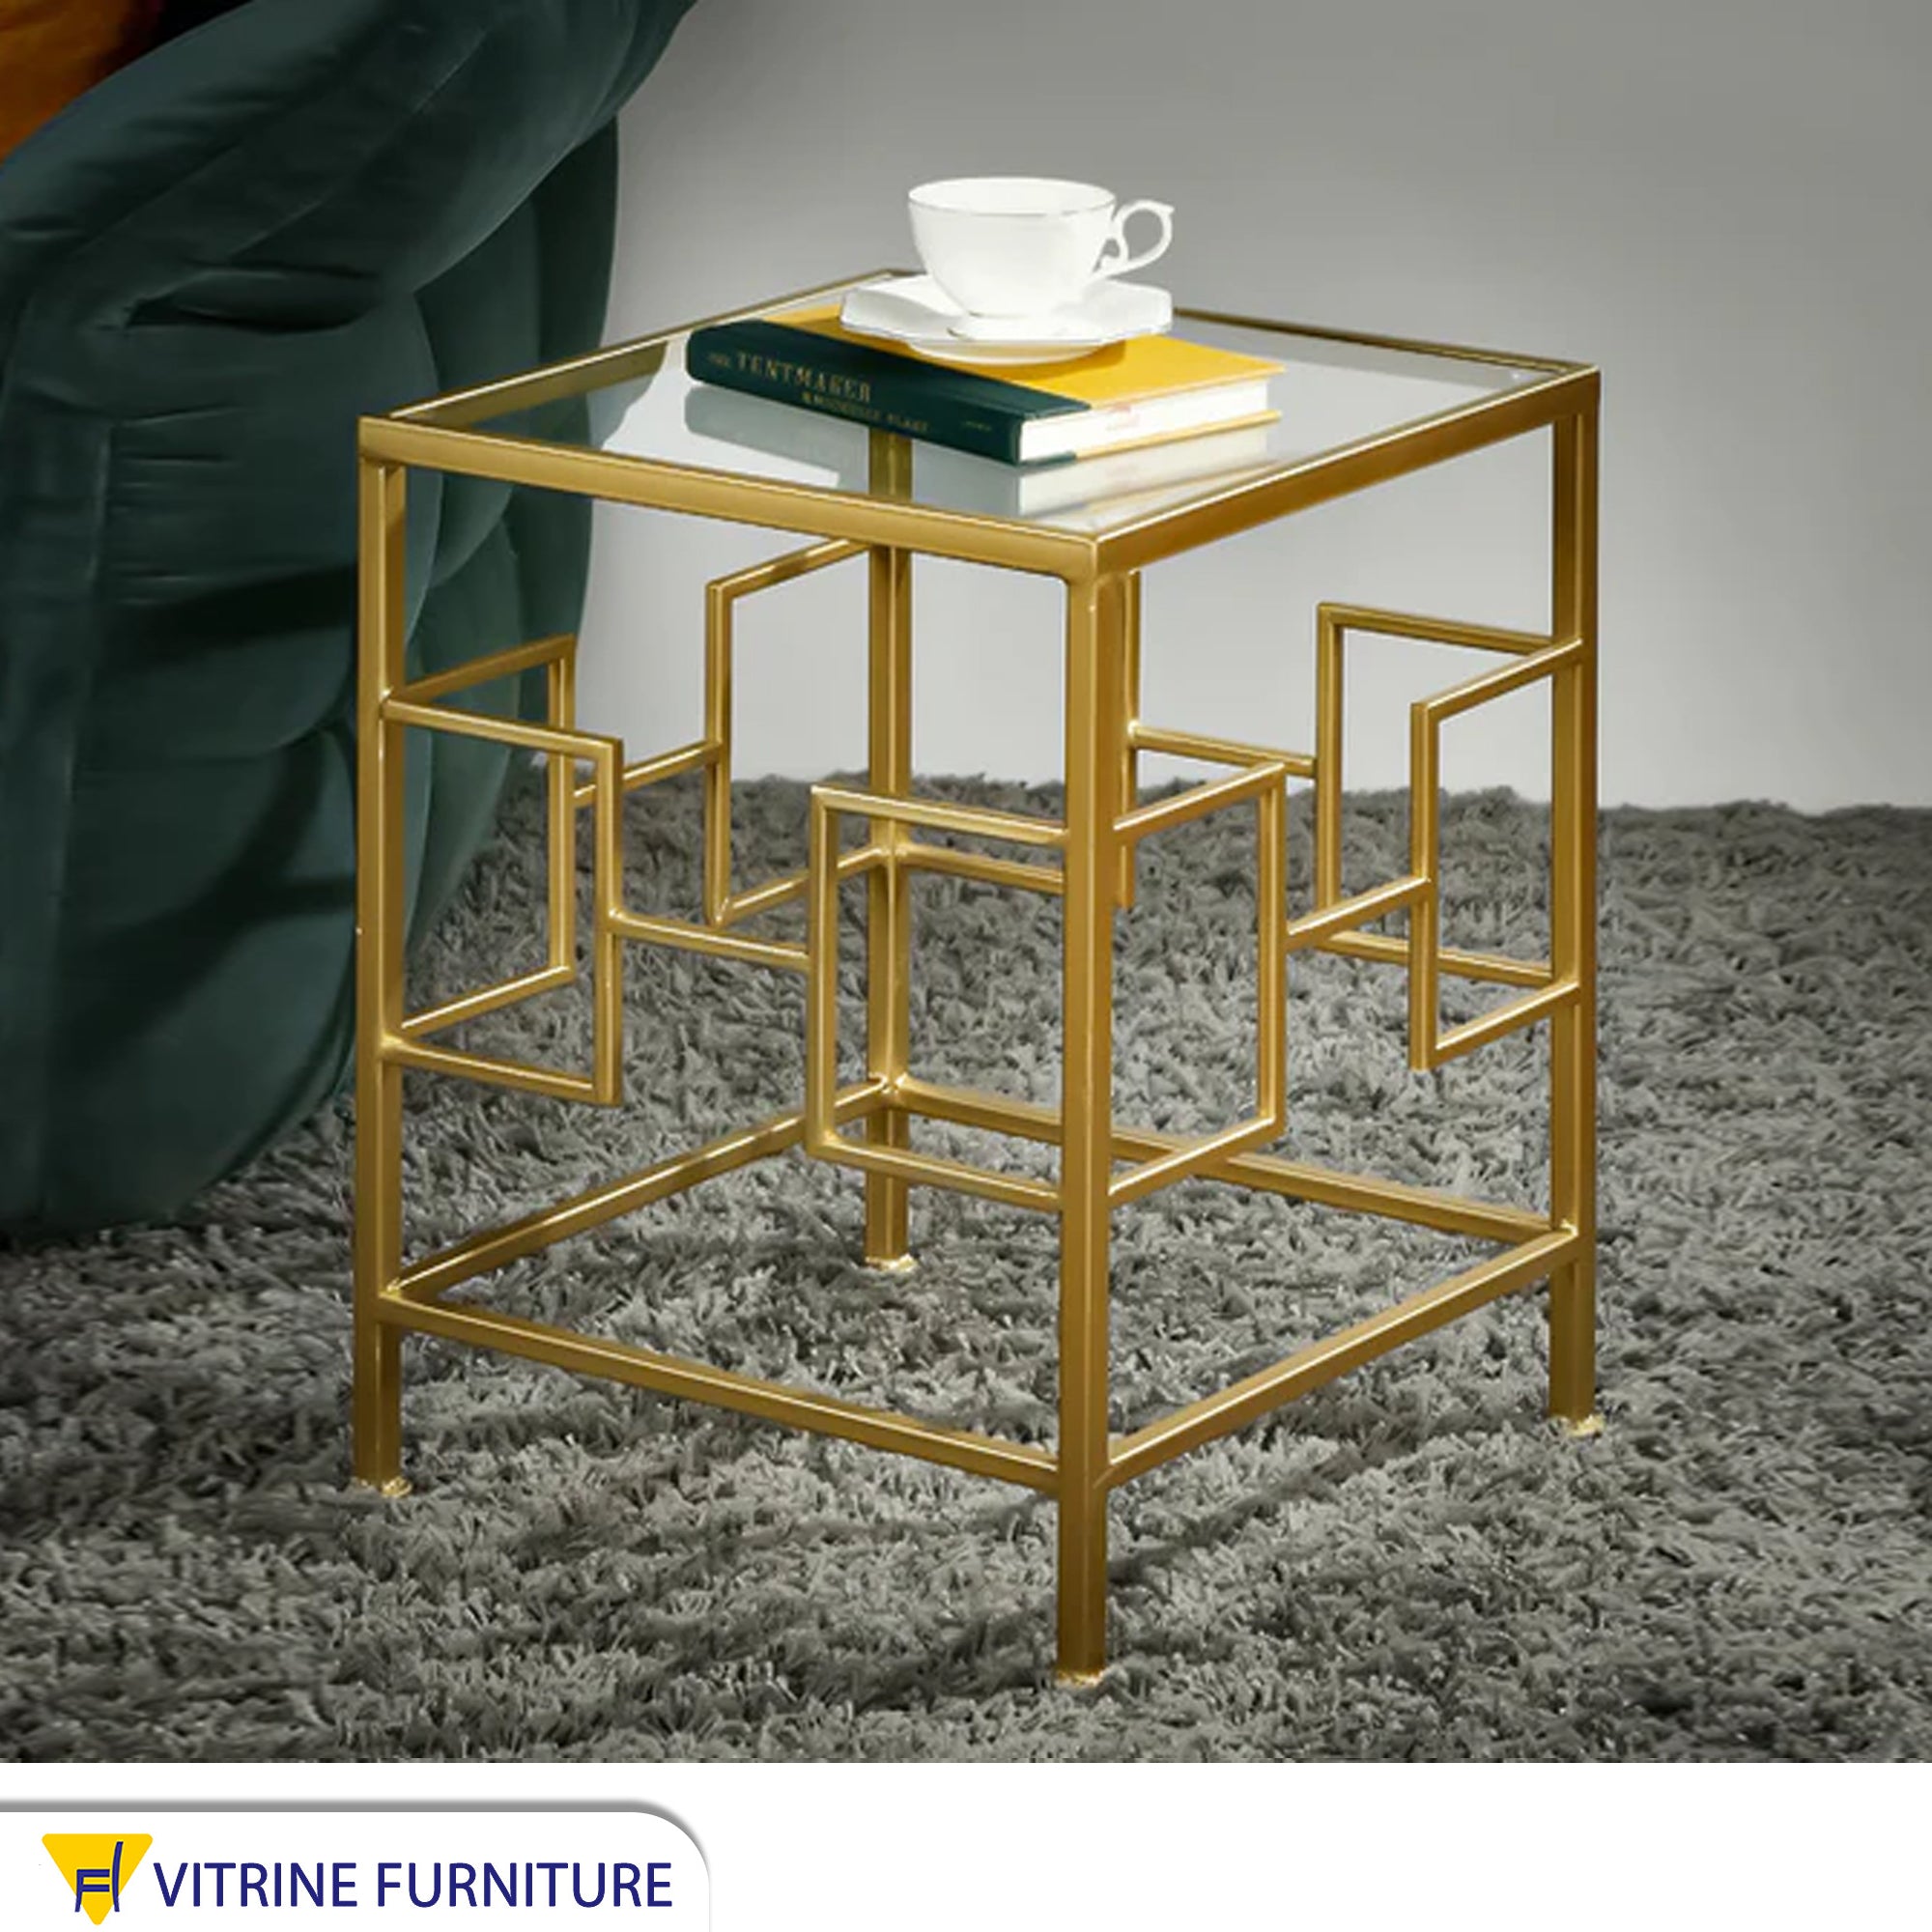 Square table with decorative metal frame